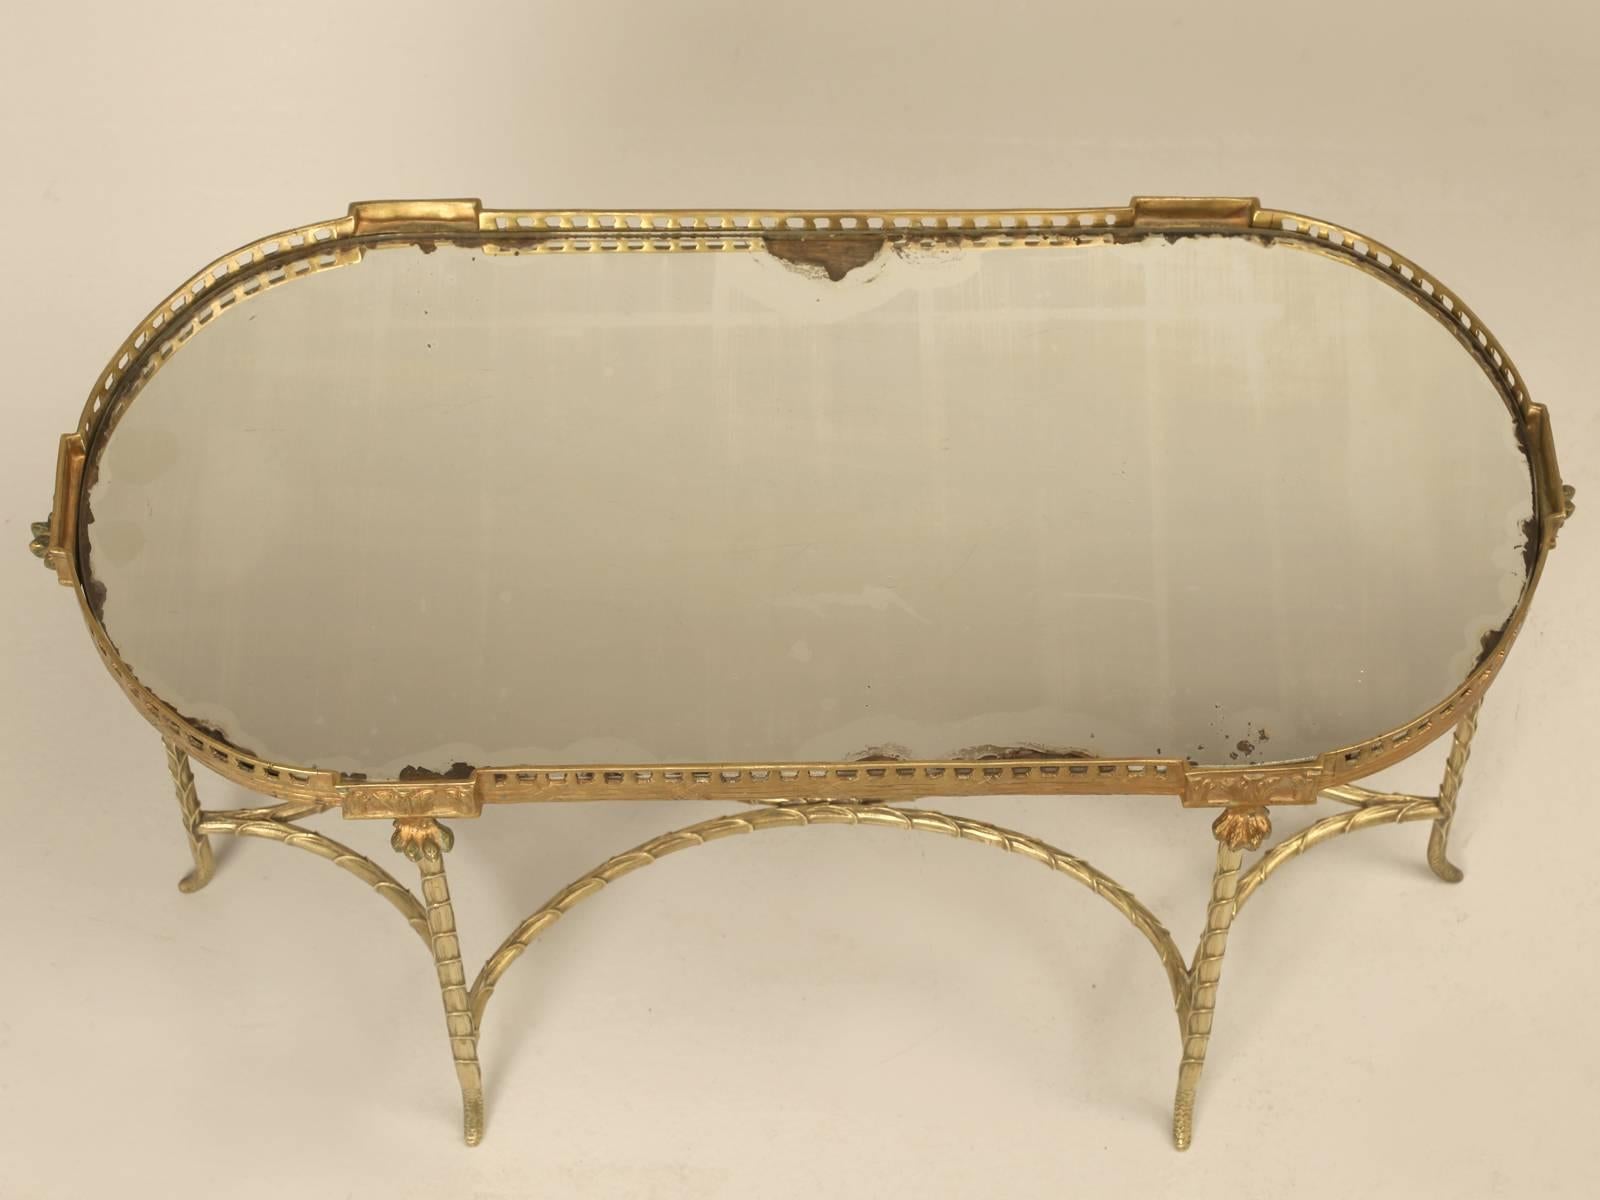 French small oval coffee table, attributed to the House of Bagues and made of solid bronze in a faux bamboo motif. We could not decide about the original heavily distressed mirror coffee table tray top, so we went ahead and made a new one, for those